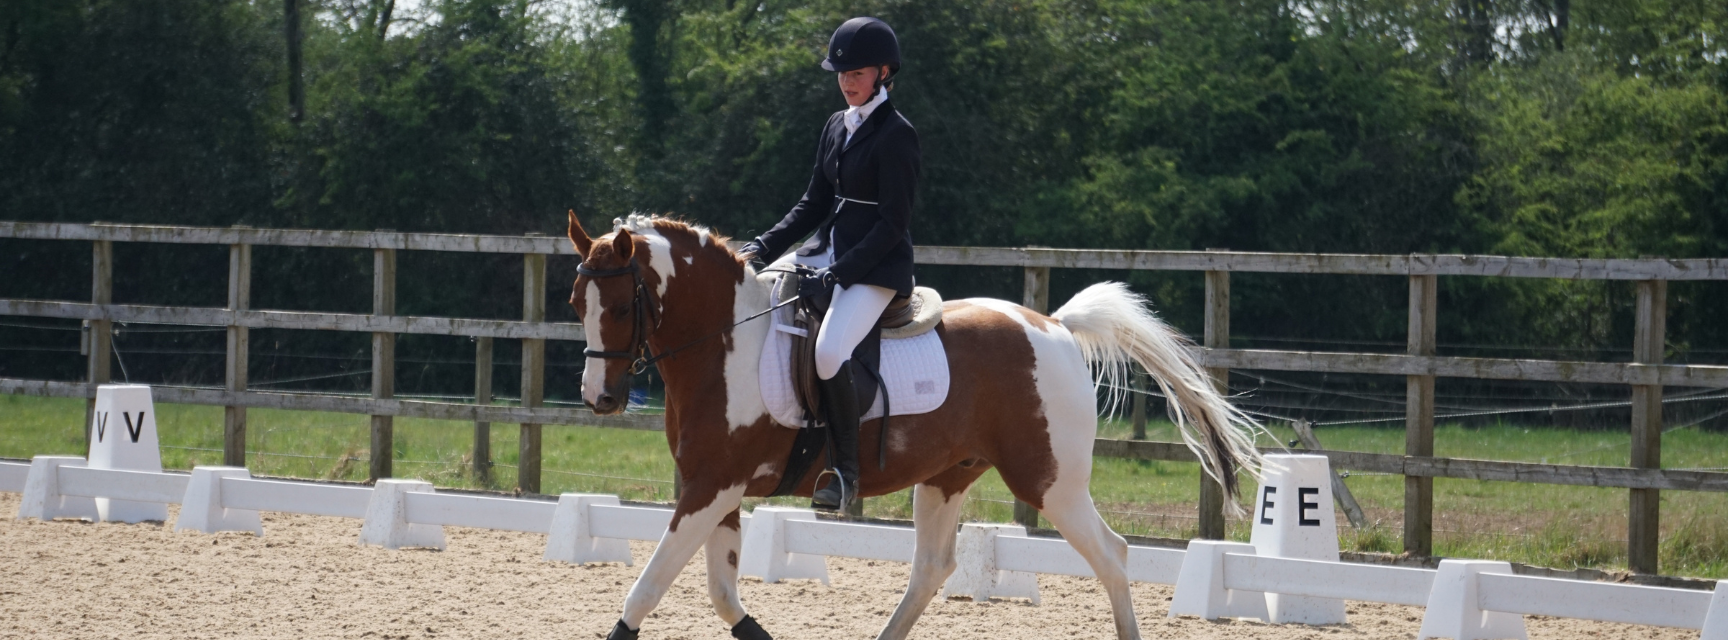 Image of Equestrian club member on a horse